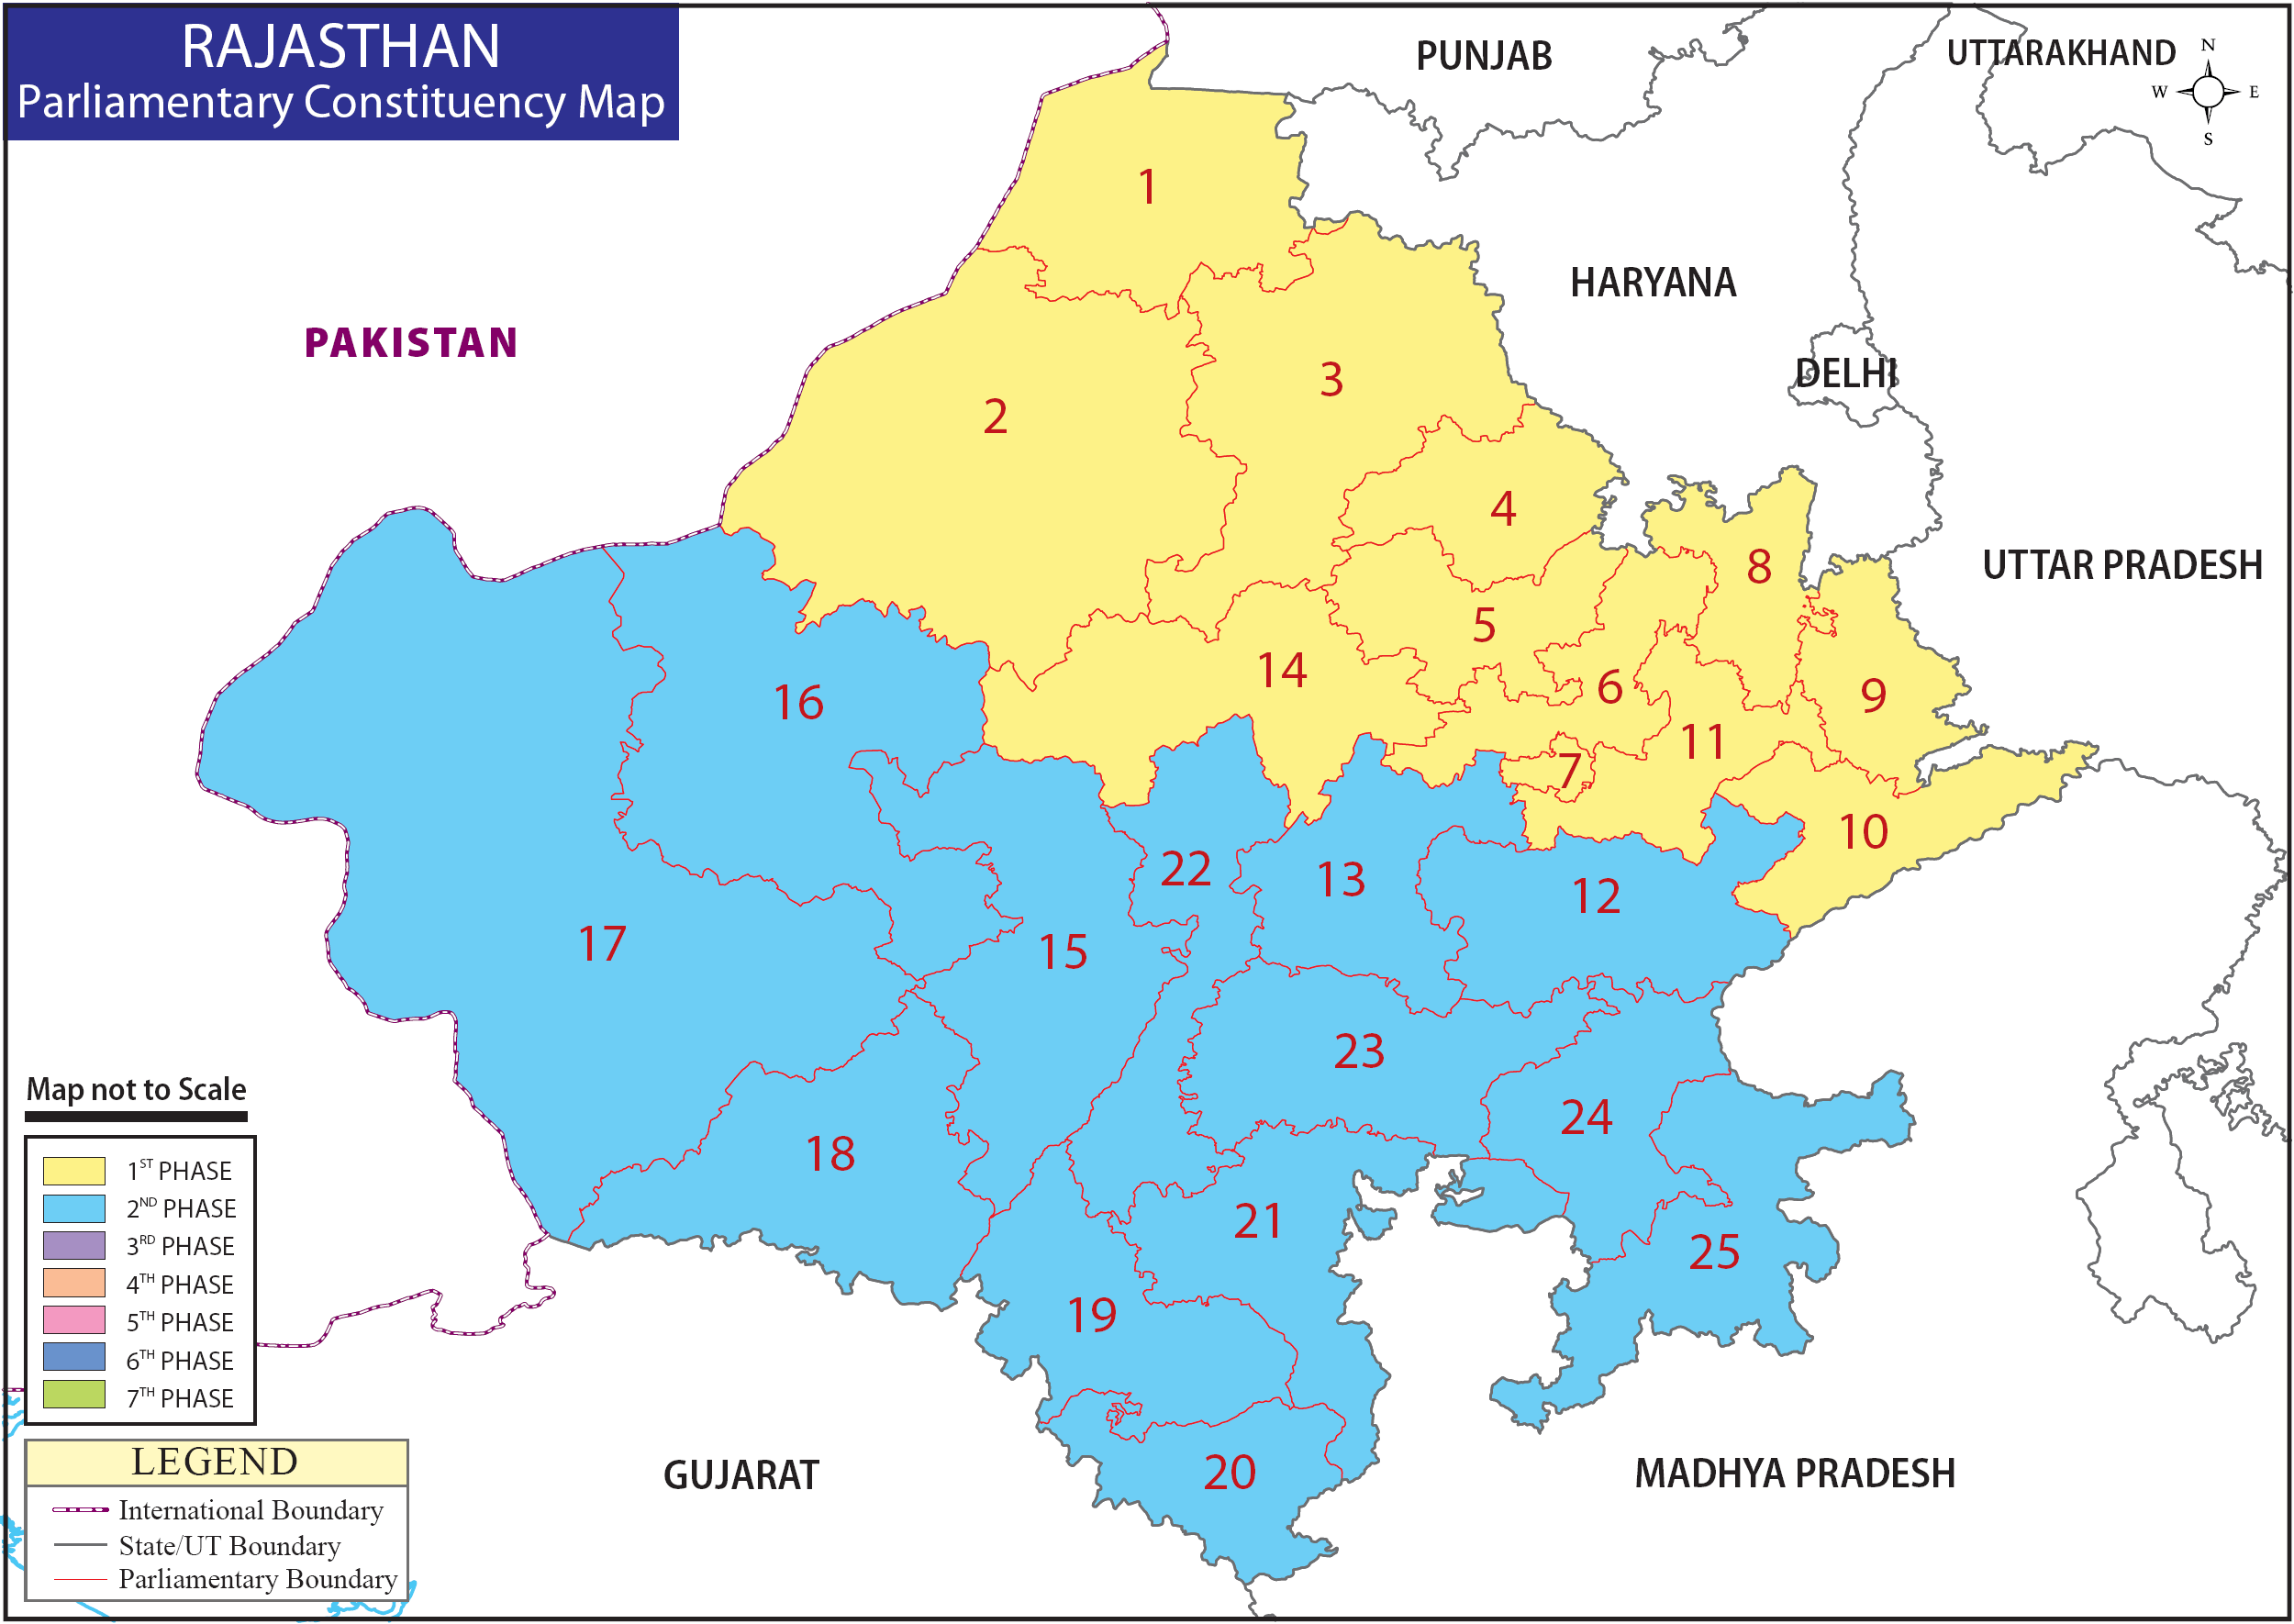 Rajasthan Parliamentary Constituency Map